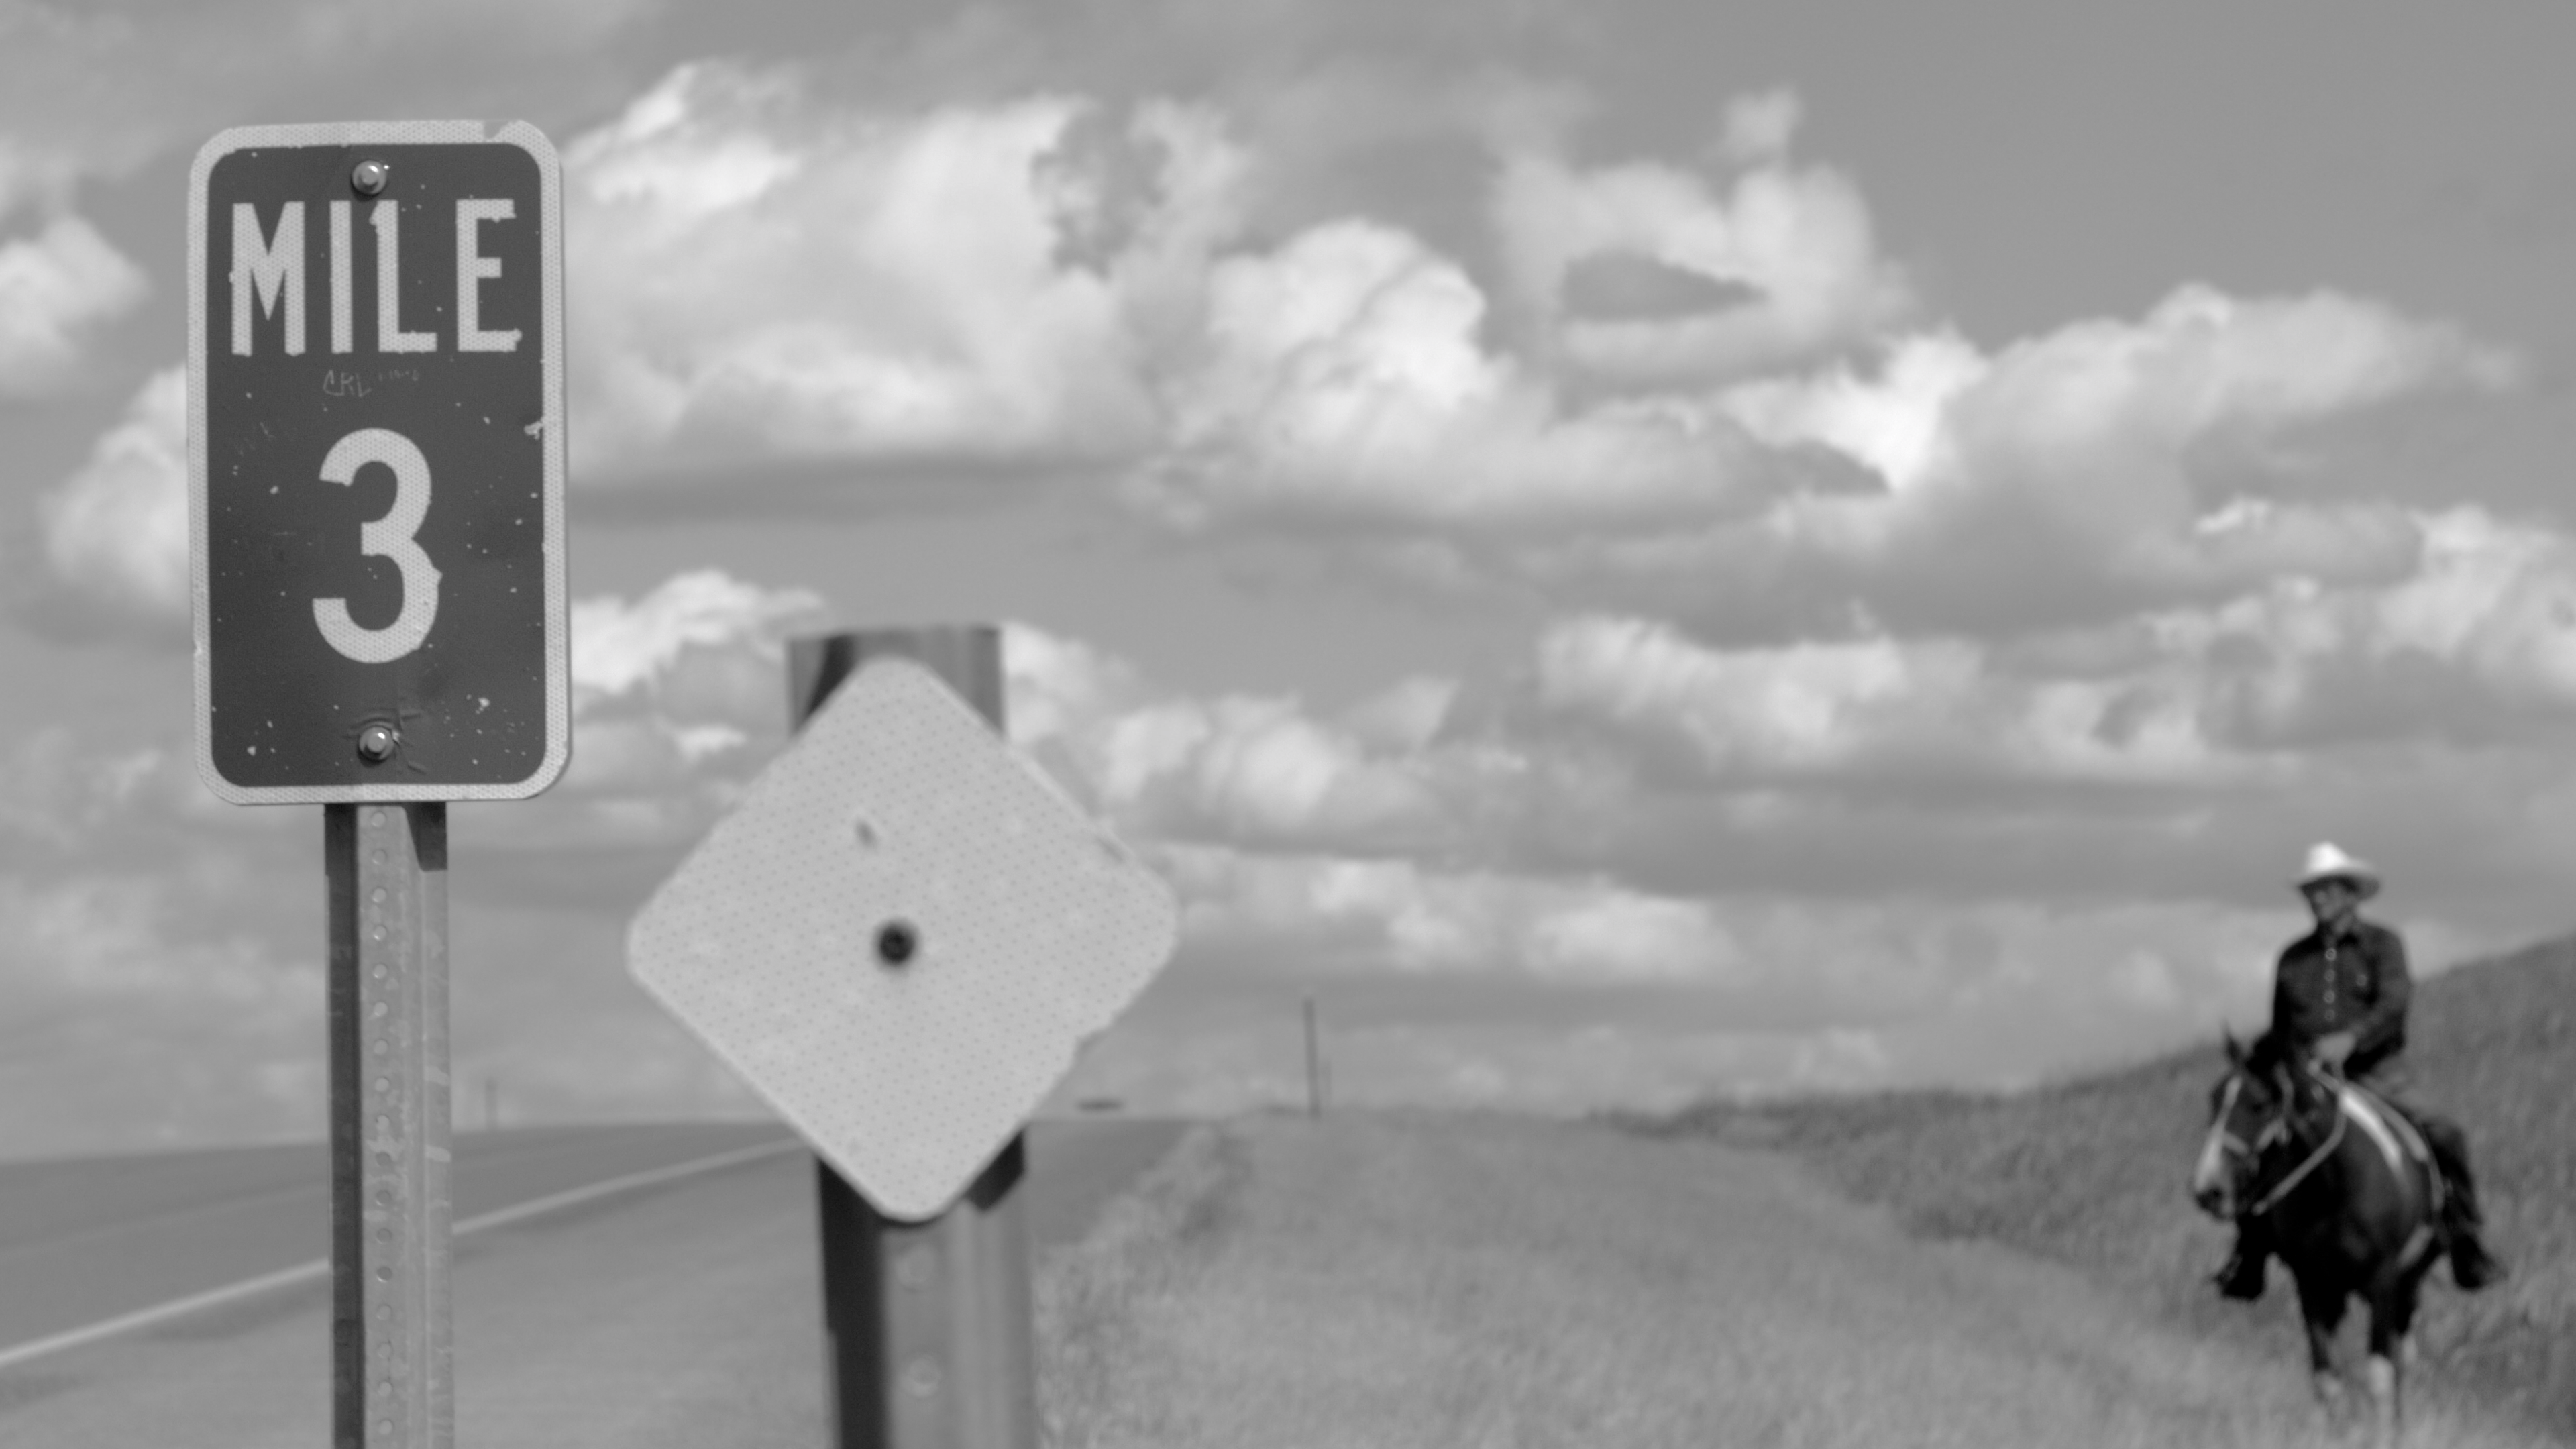 A Mile 3 highway sign in focus, a man on horseback out of focus, in the background to its left.